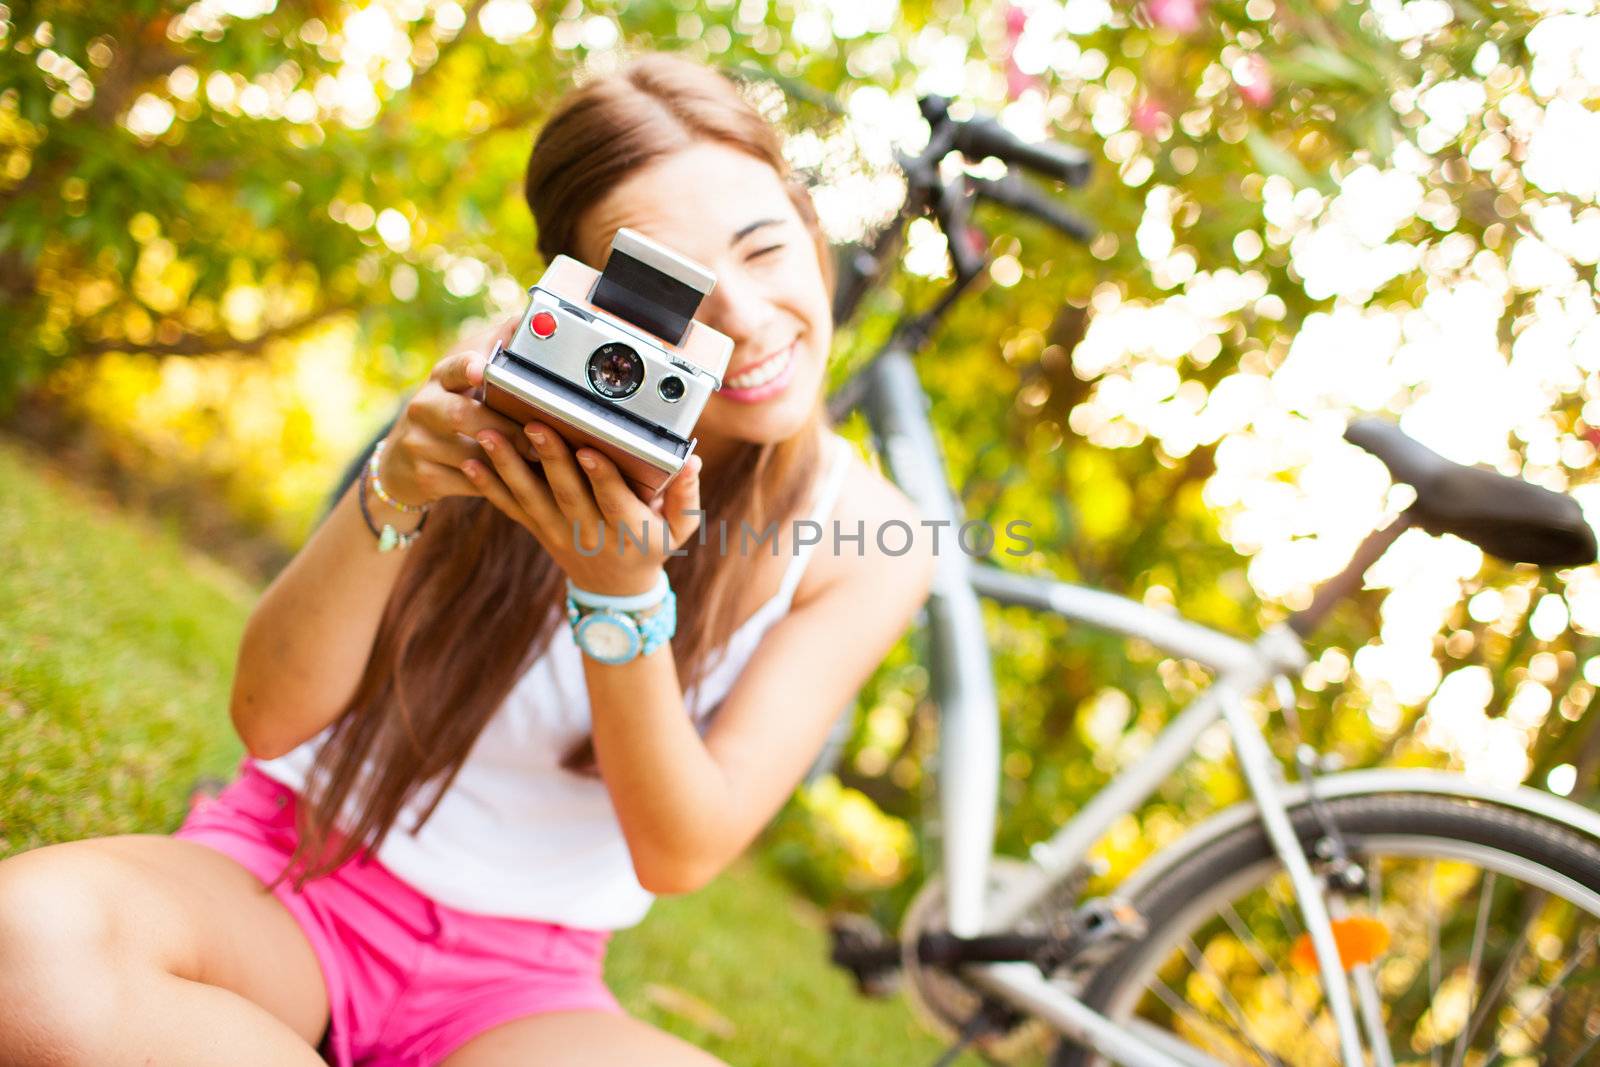 beautiful young woman playing with a vintage camera